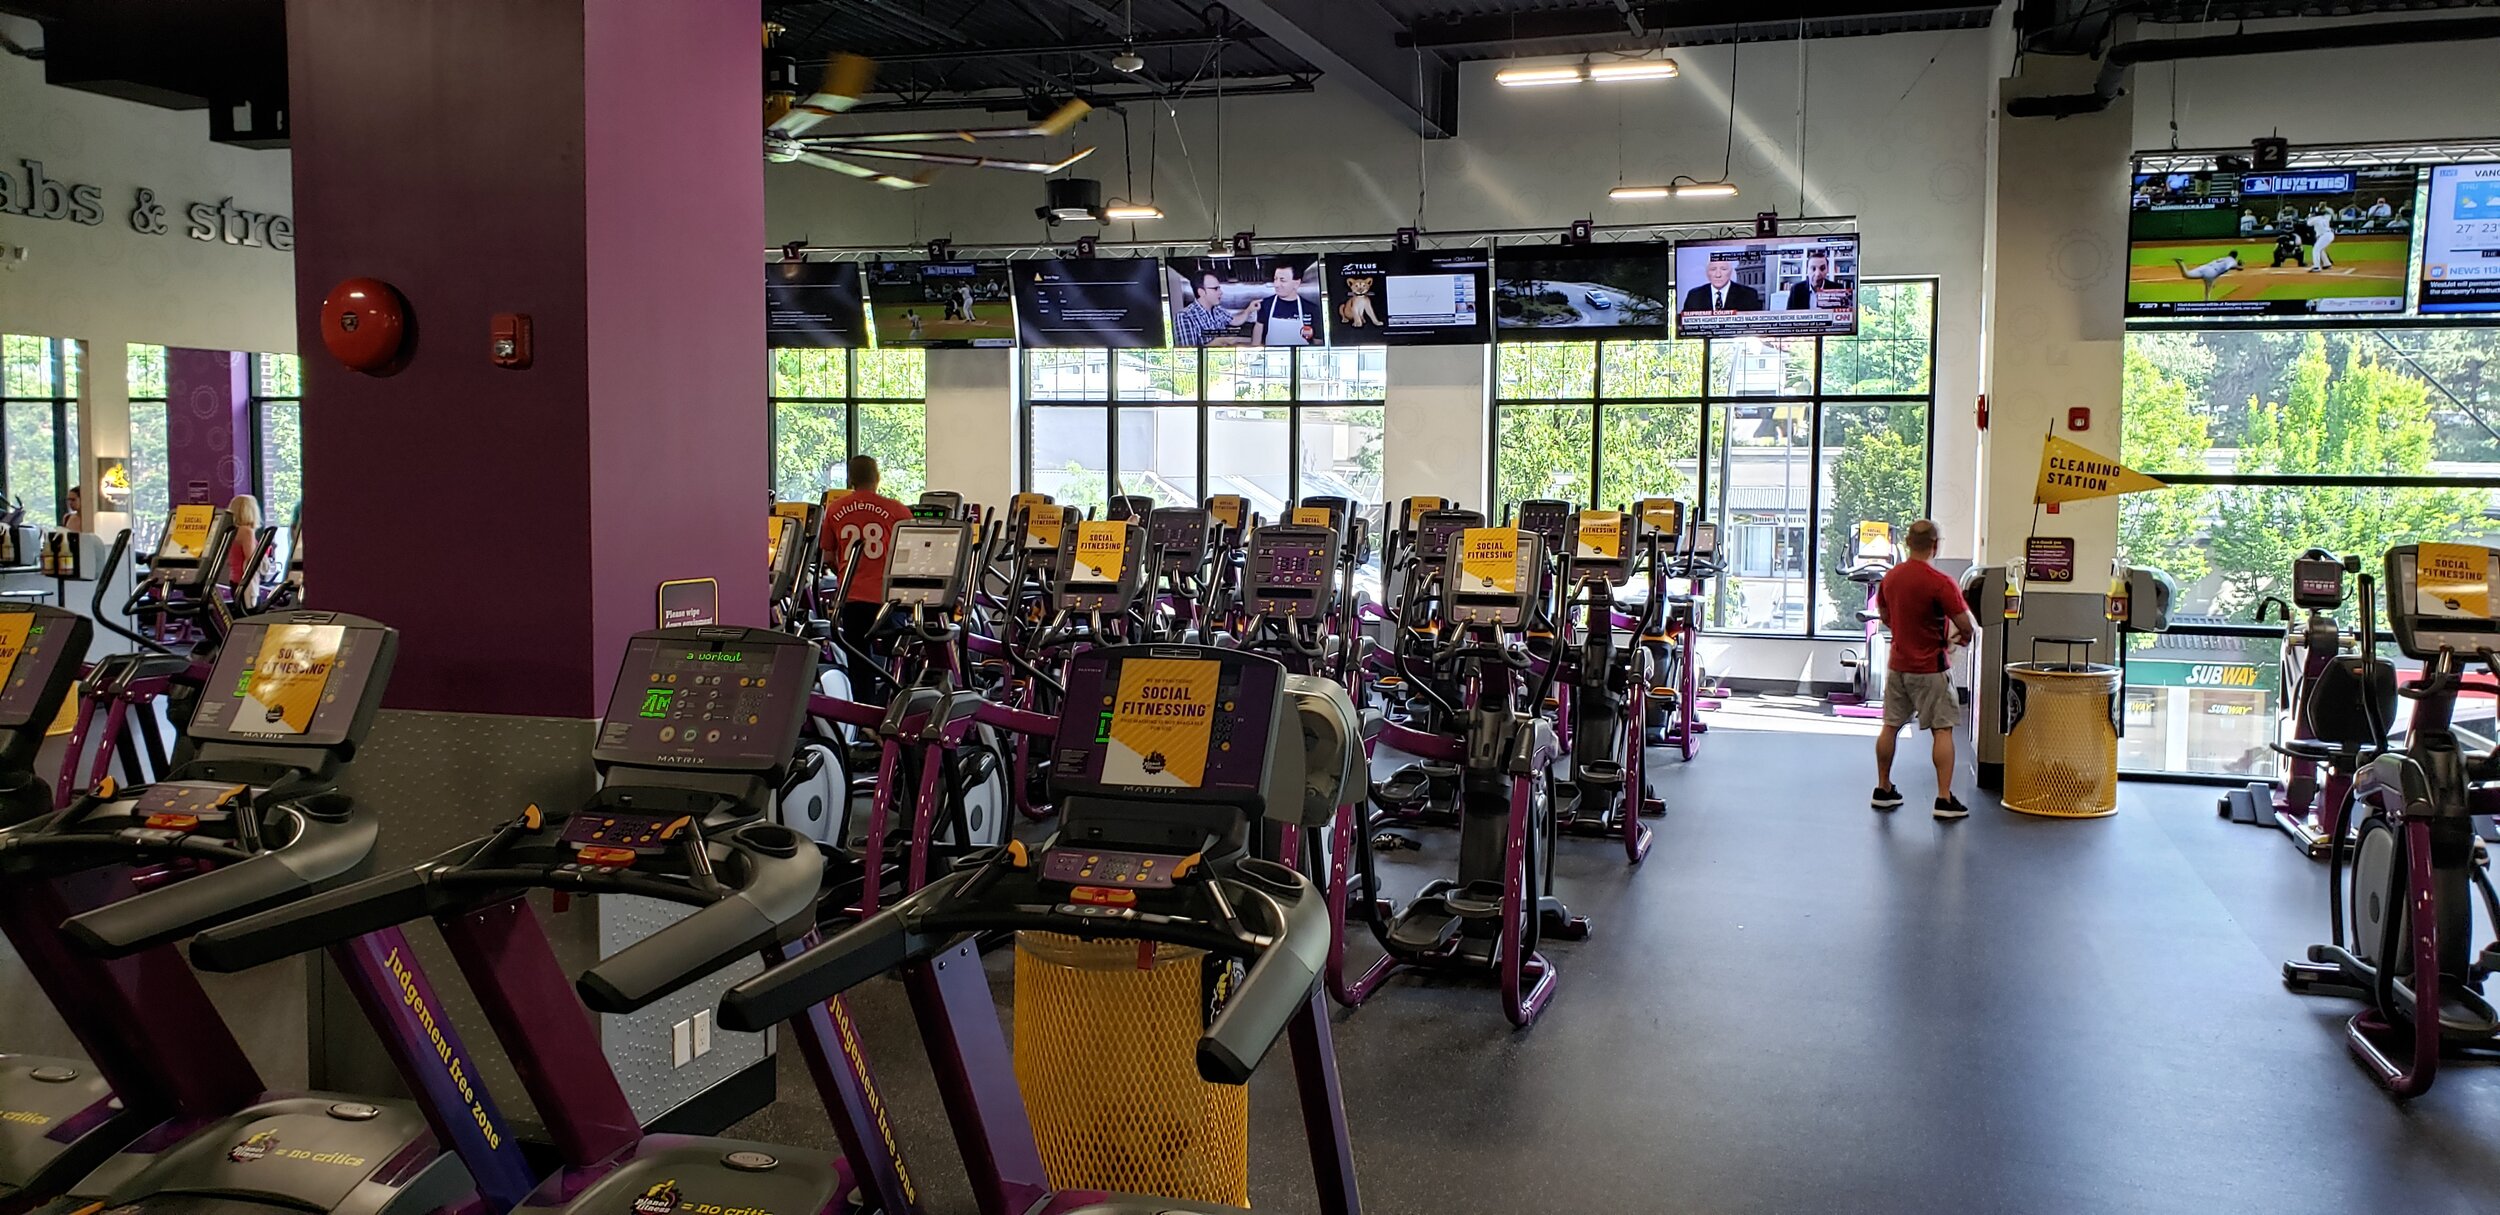 15 Minute Are There Planet Fitness In Canada for Beginner